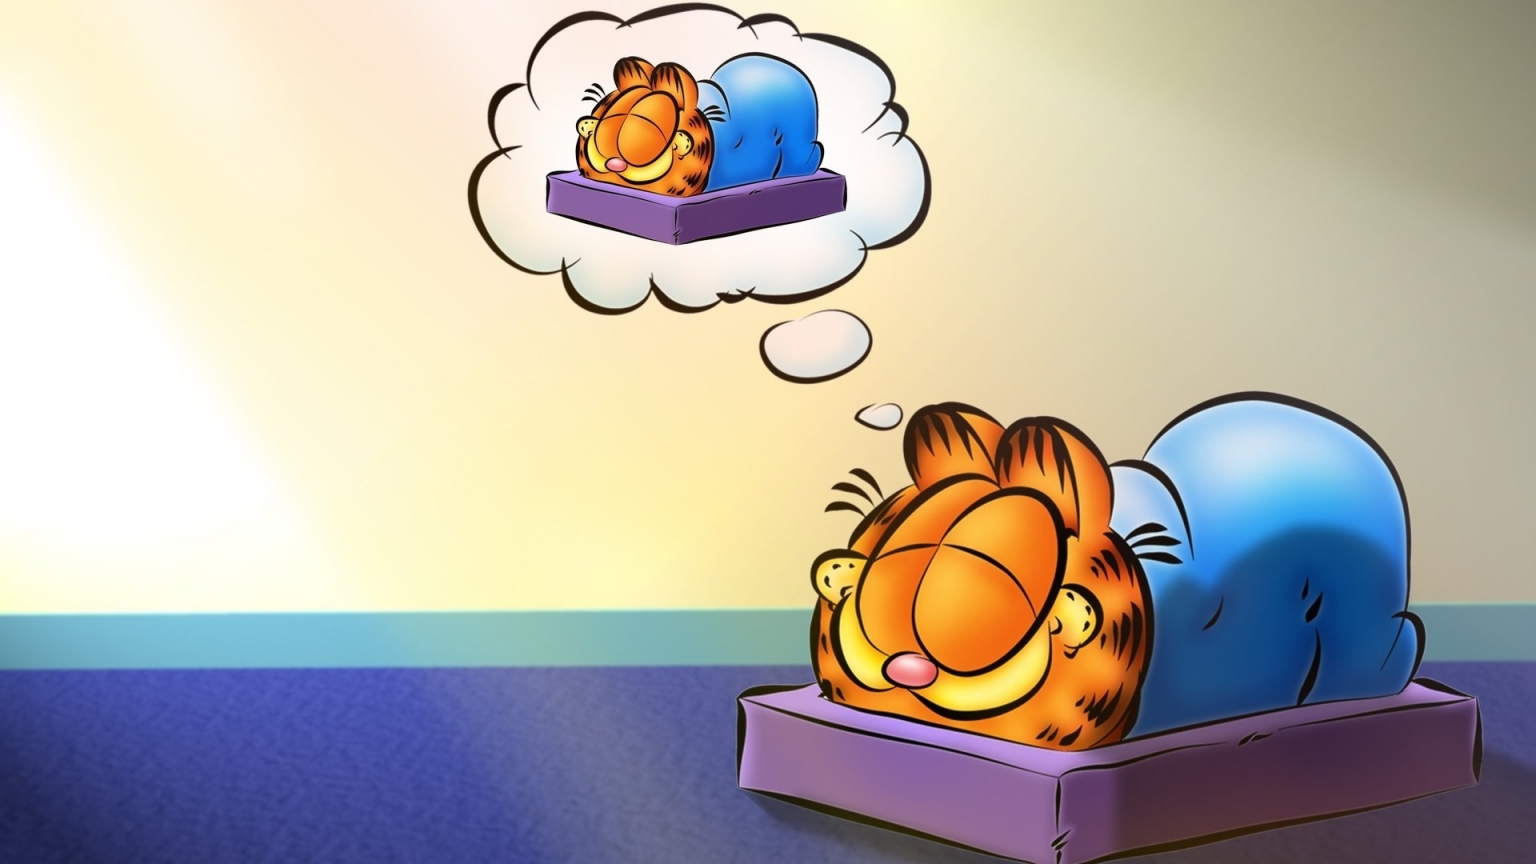 The Garfield Show for 1536 x 864 HDTV resolution